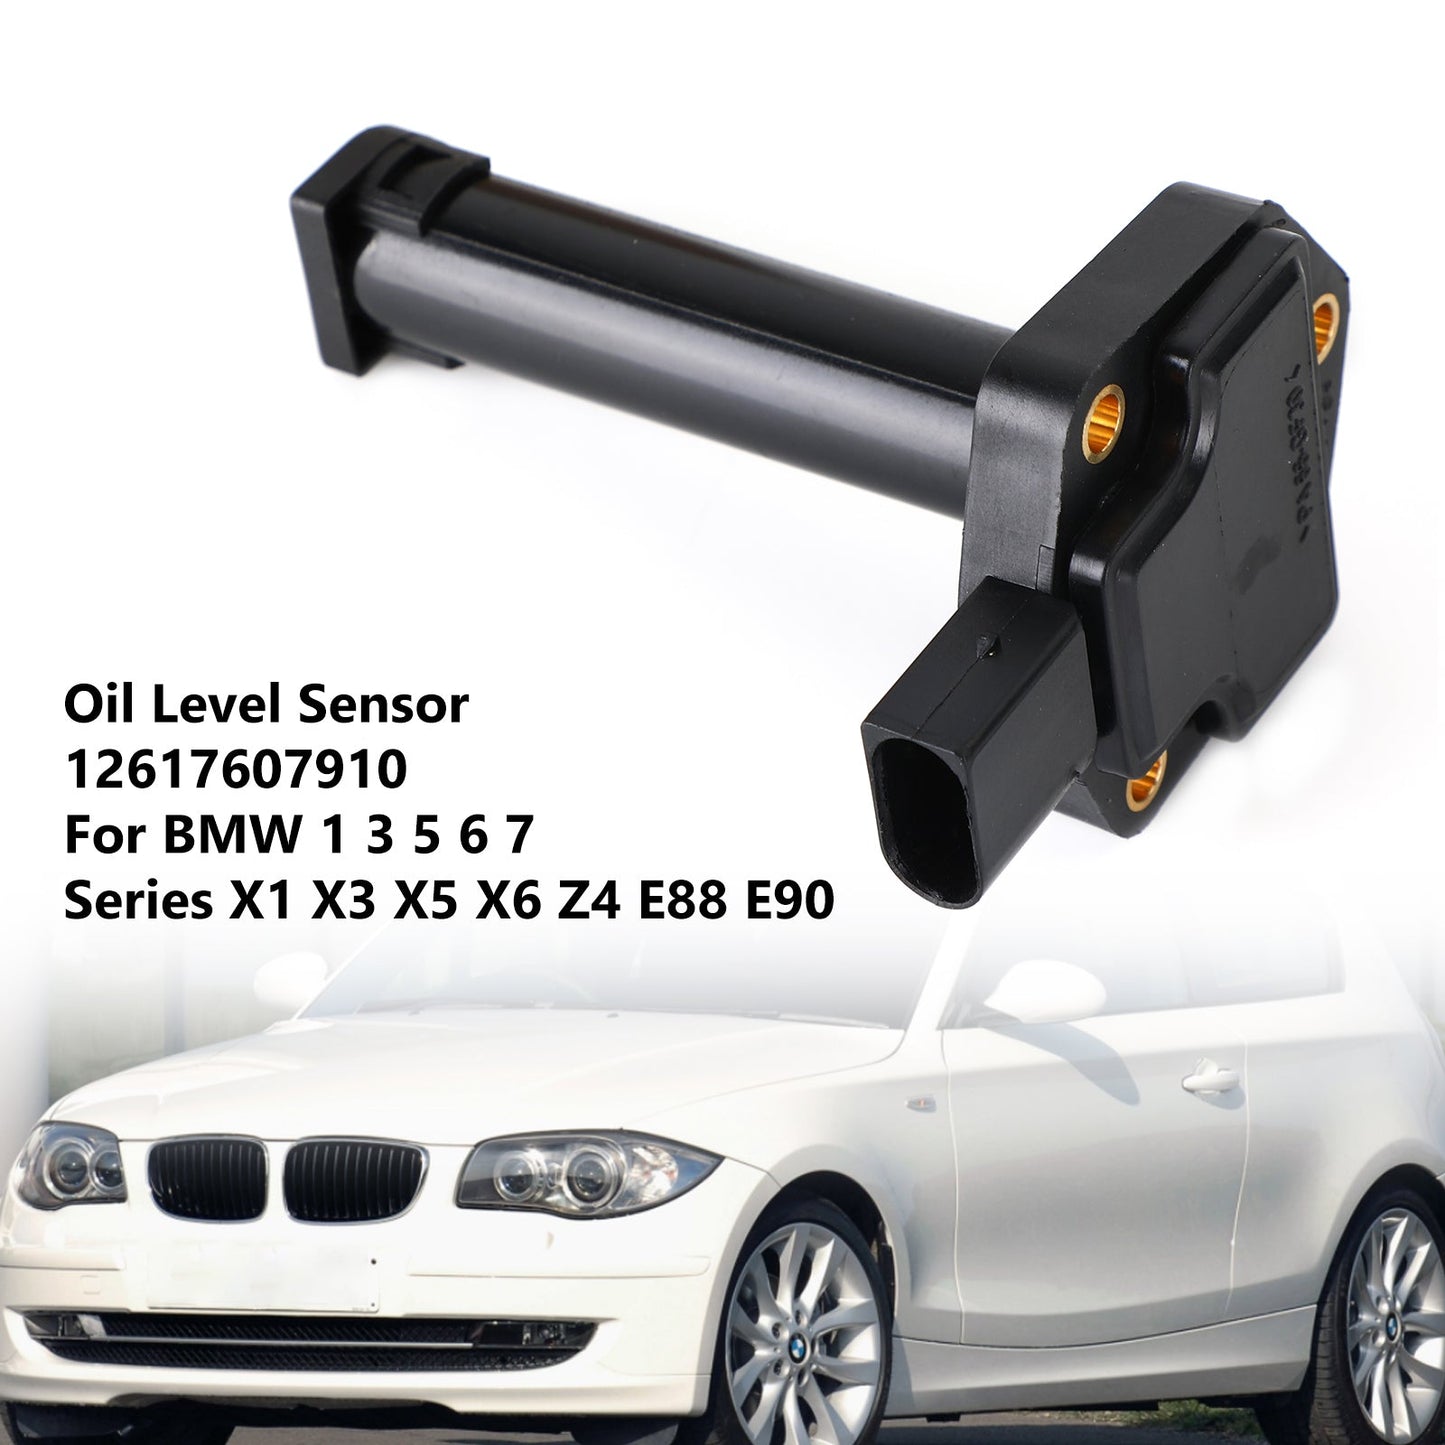 Oil Level Sensor Replacement 12617607910 For BMW 1 3 5 6 7 Series X1 X3 X5 Z4